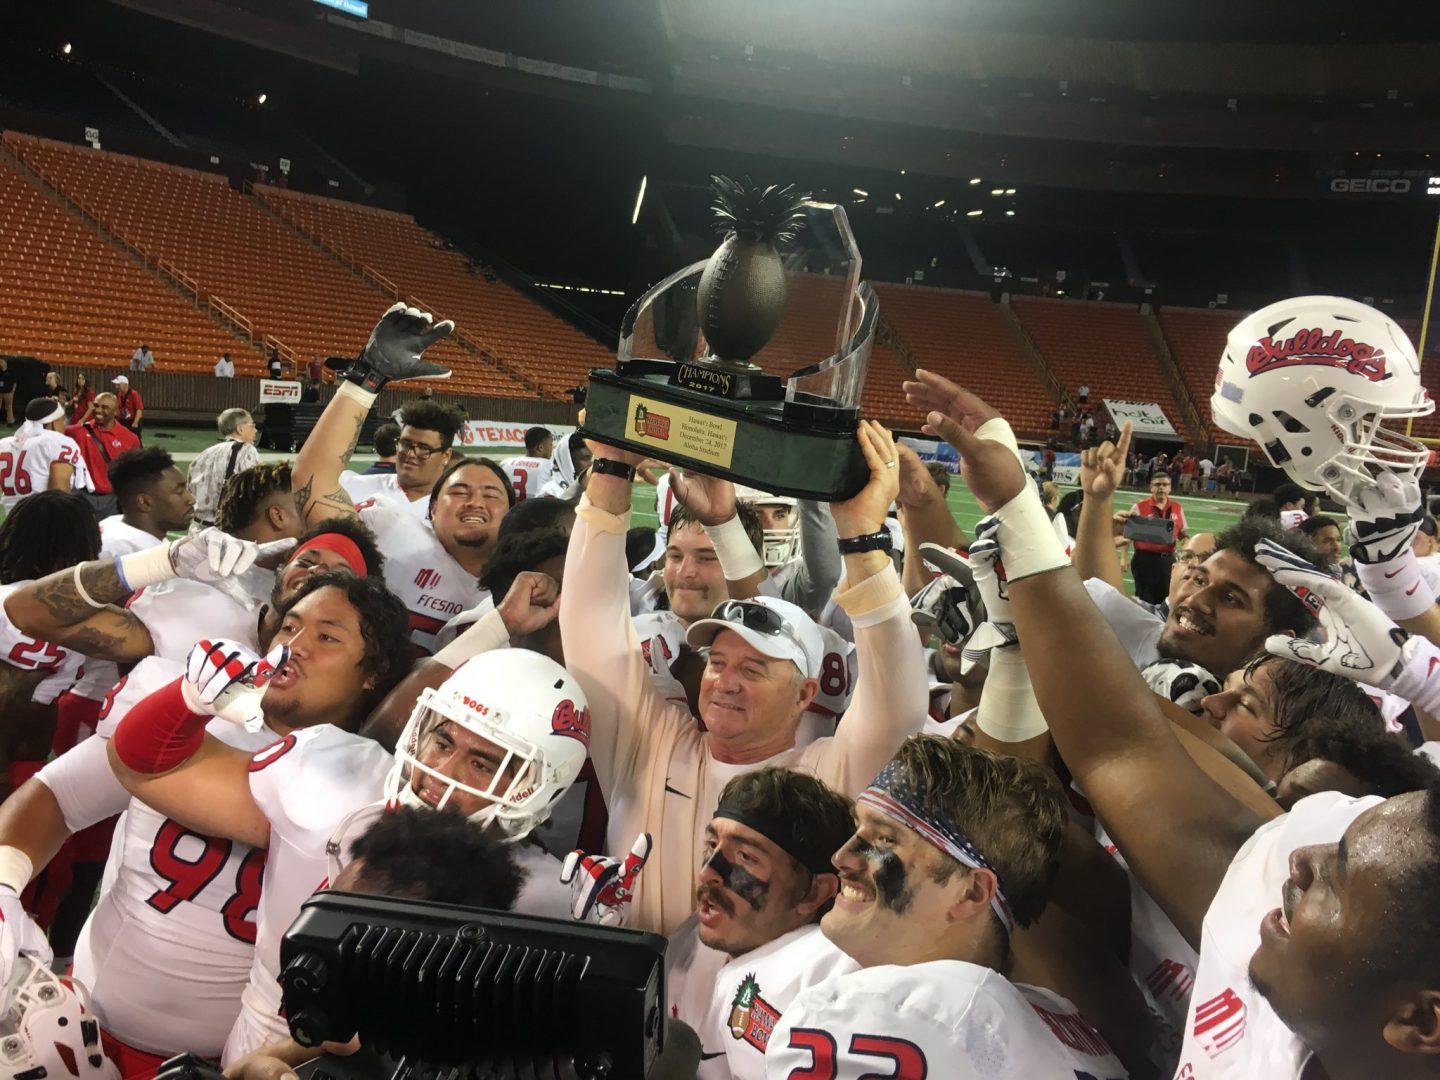 Coach Jeff Tedford and the Fresno State football team celebrating their Hawaii Bowl win against the Houston Cougars, 33-27 at Aloha Stadium on Dec. 24. (Fresno State Athletics) 